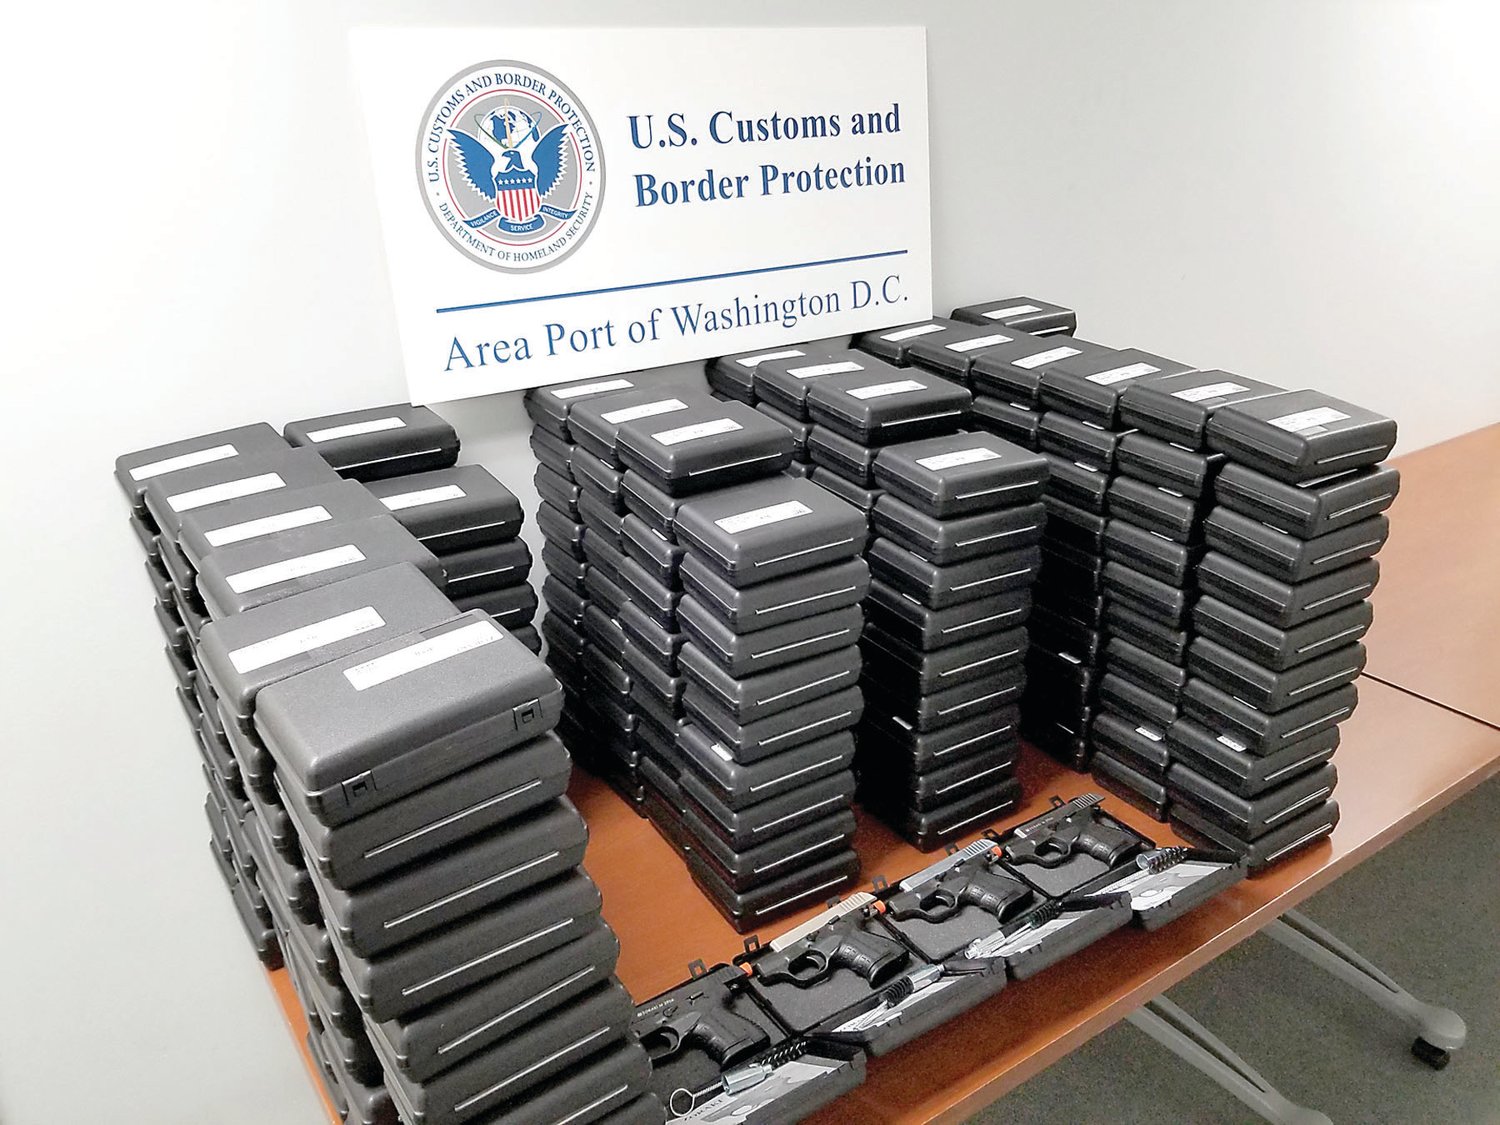 U.S. Customs and Border Protection officers at Washington Dulles International Airport seized 240 blank guns May 28, that can easily be converted into firearms for violating firearms import laws. The guns were destined for an address in Bensalem.